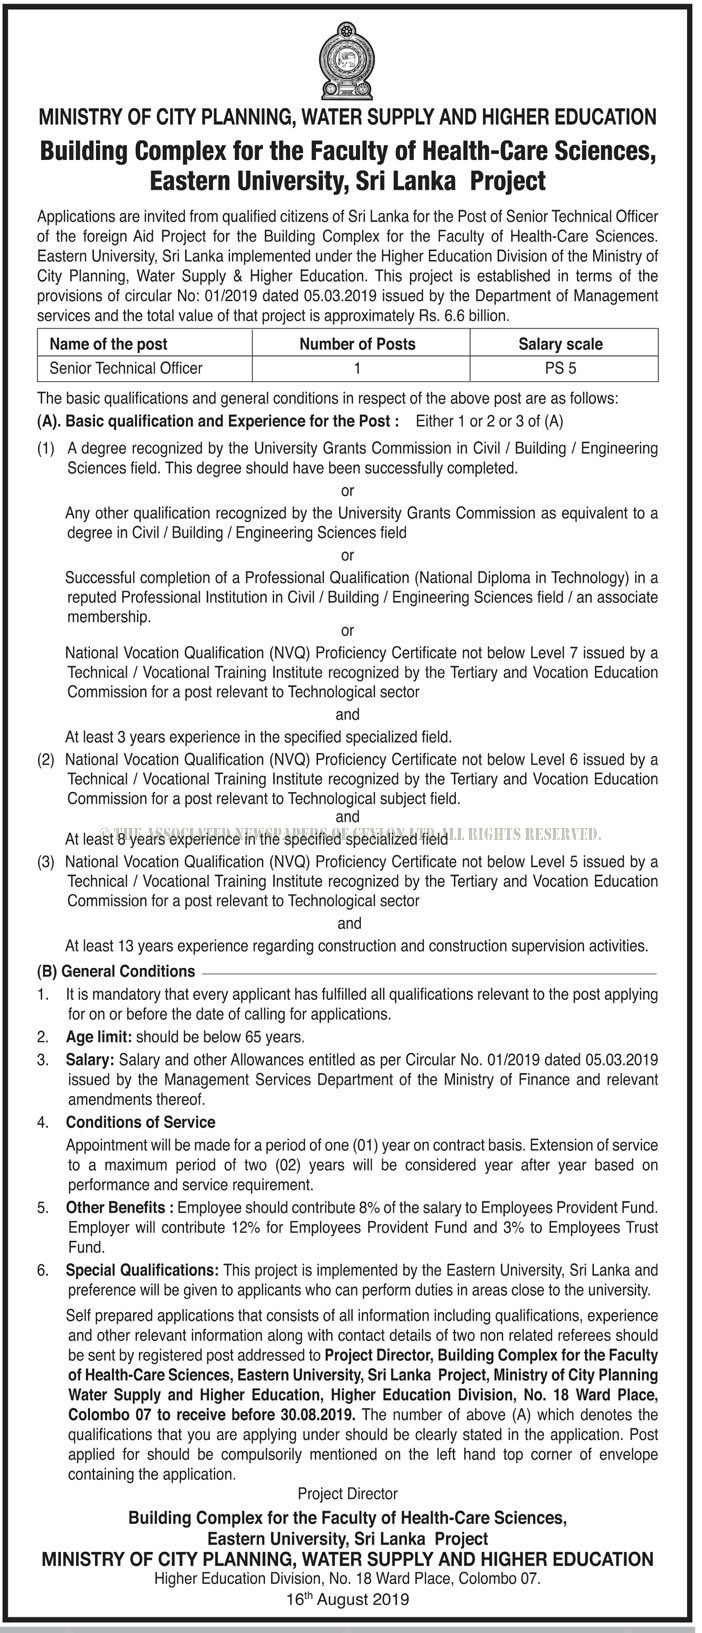 Ministry of City Planning, Water Supply & Higher Education Job Vacancies 